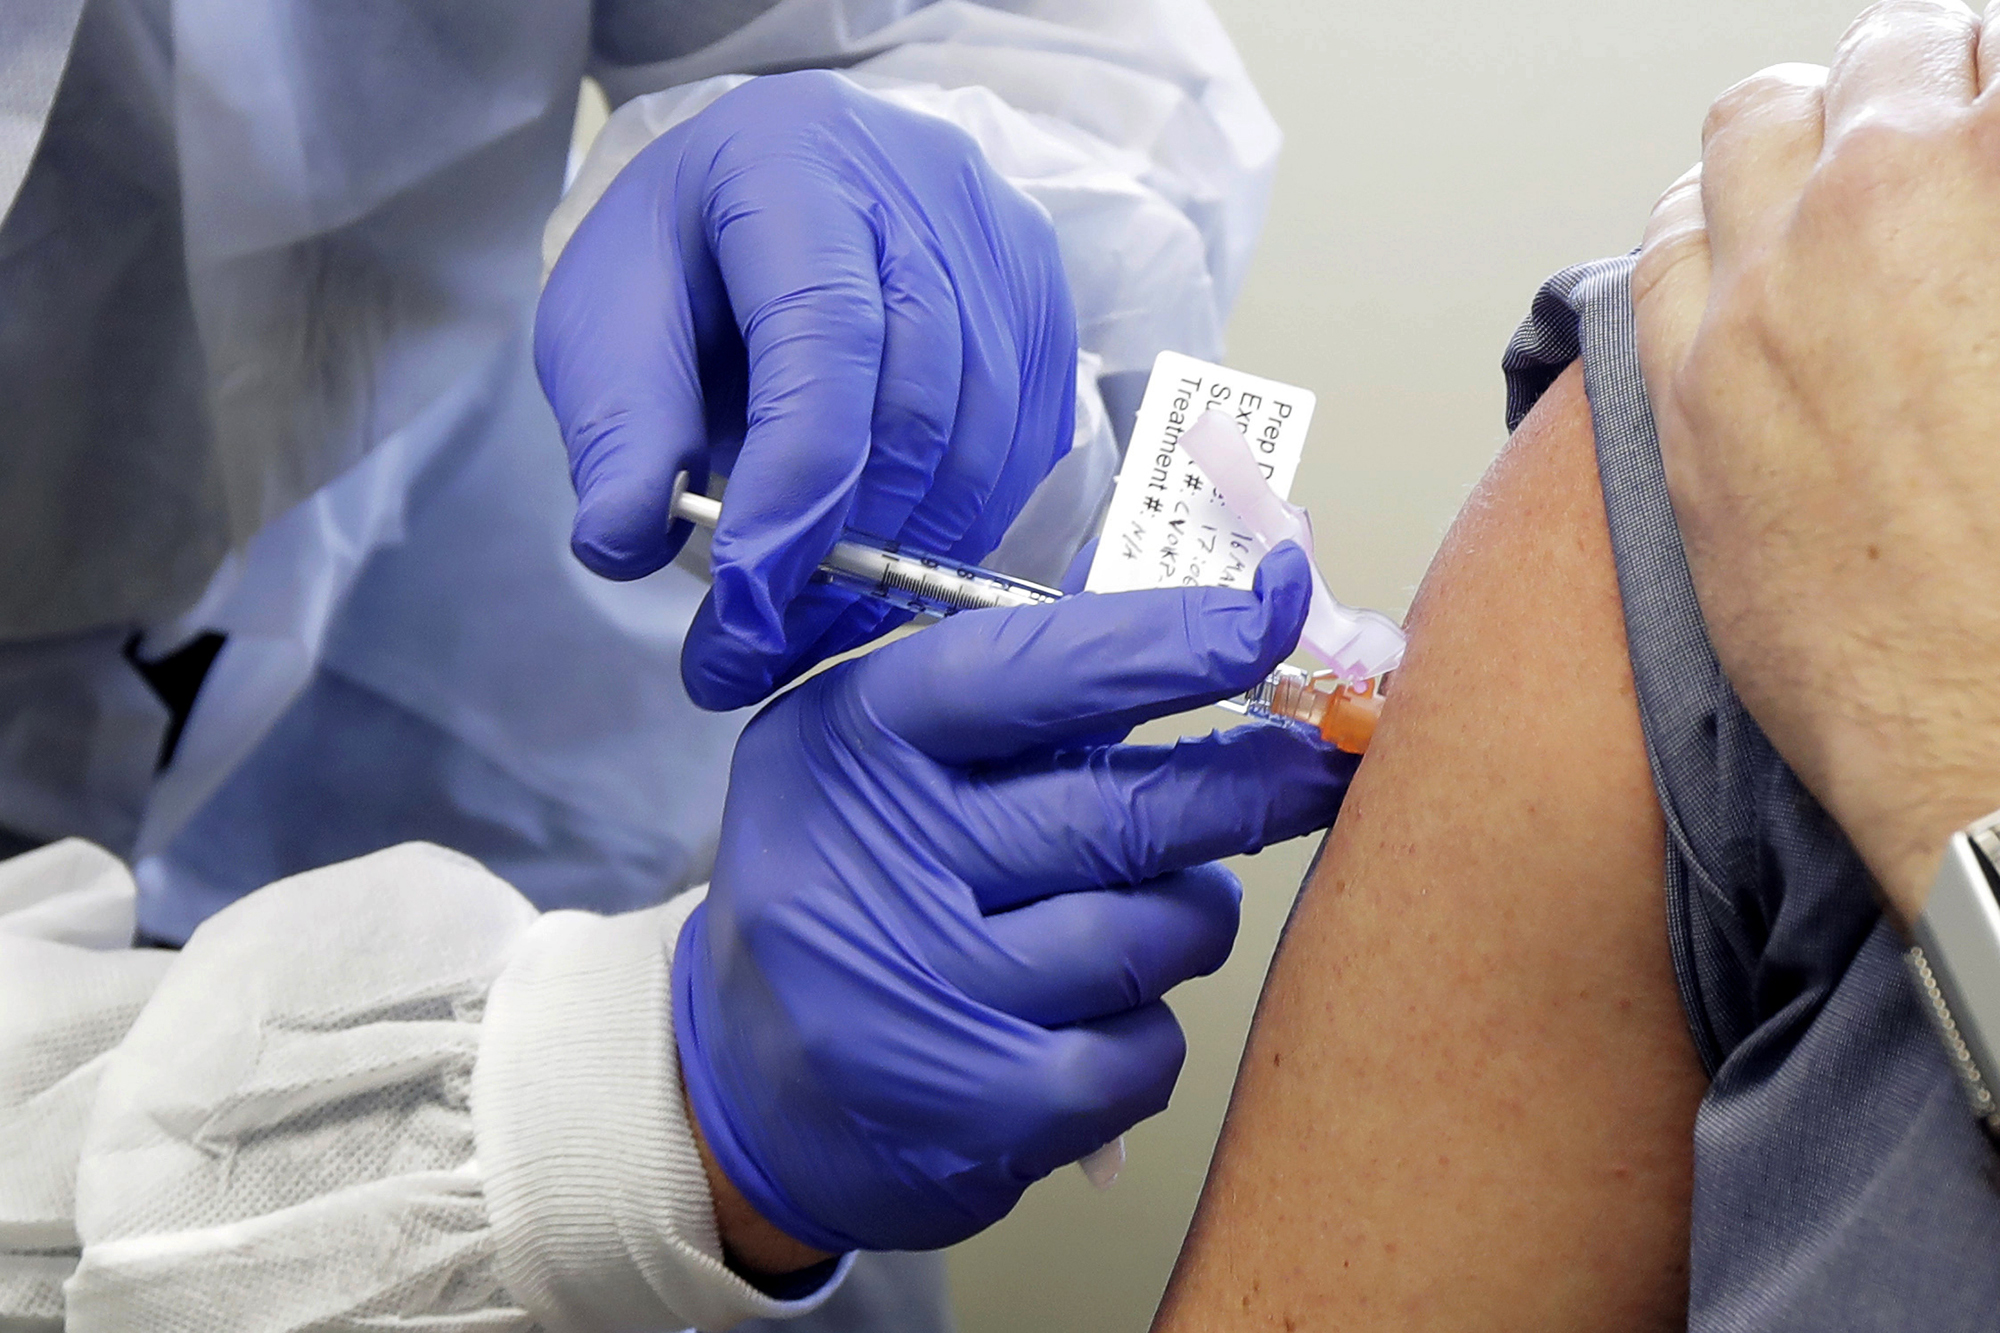 A patient receives a shot in the first-stage safety study clinical trial of a potential vaccine for COVID-19